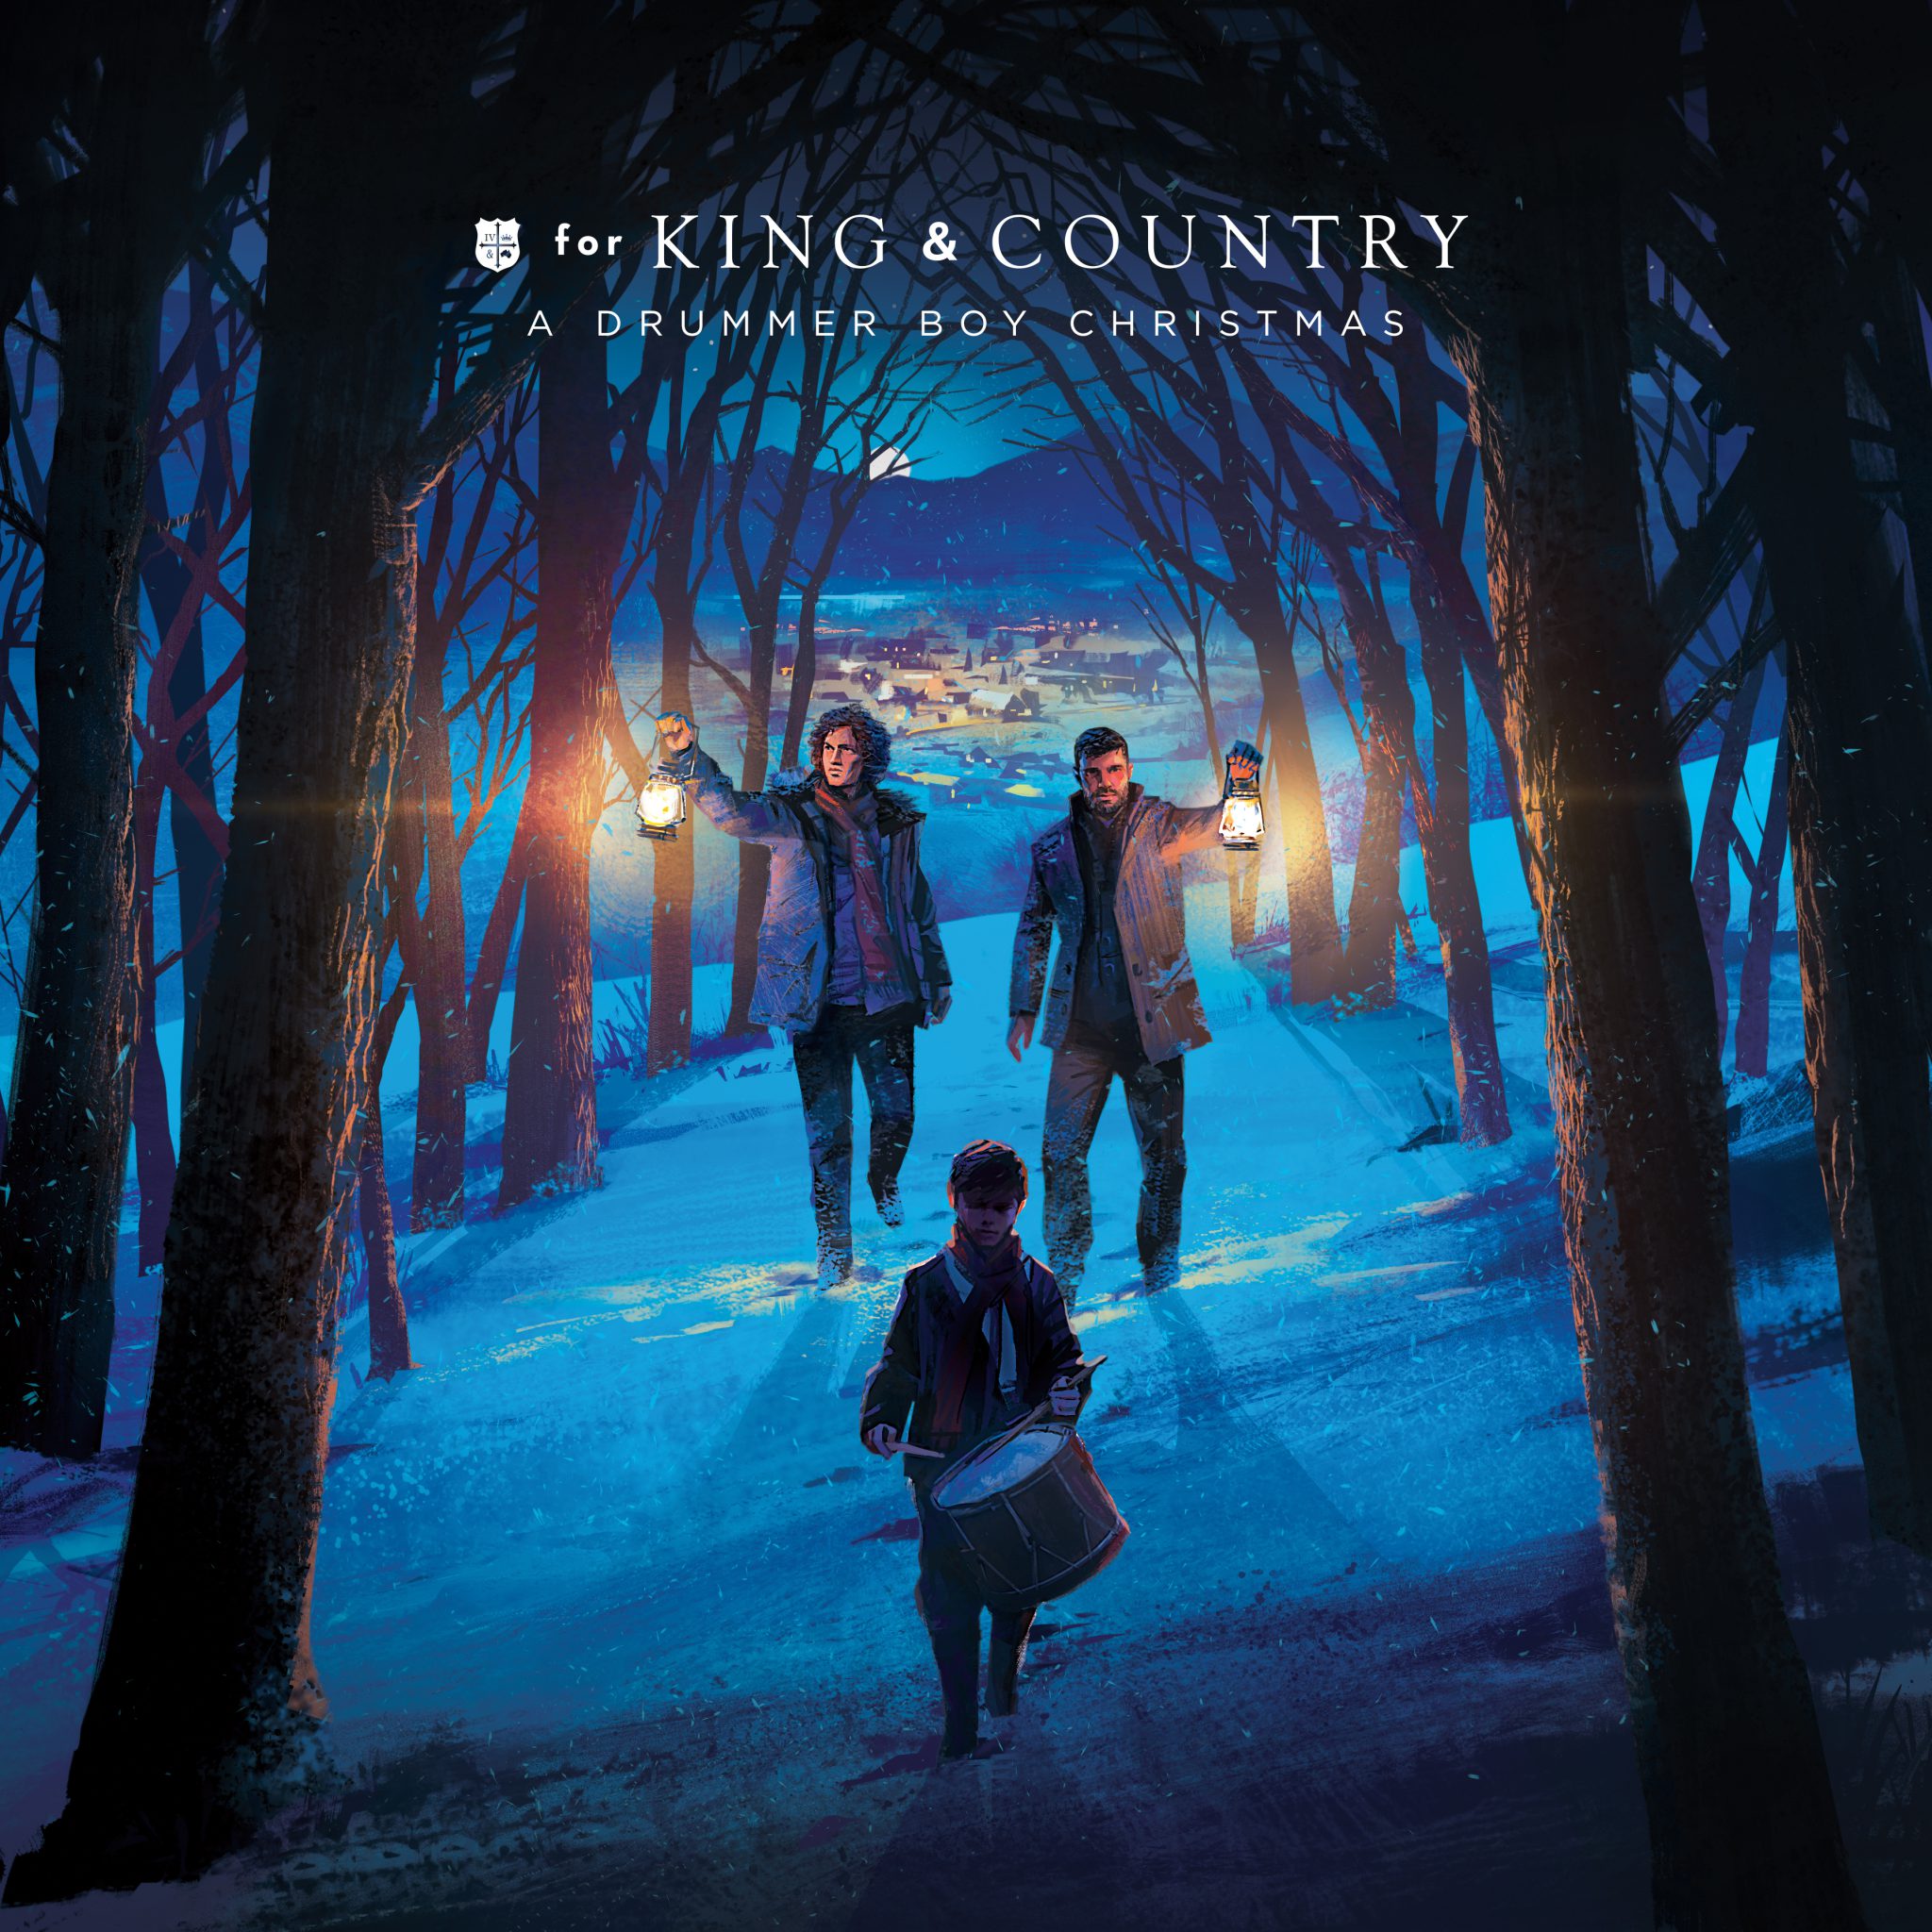 For King & Country/Curb Word album “A Drummer Boy Christmas” on